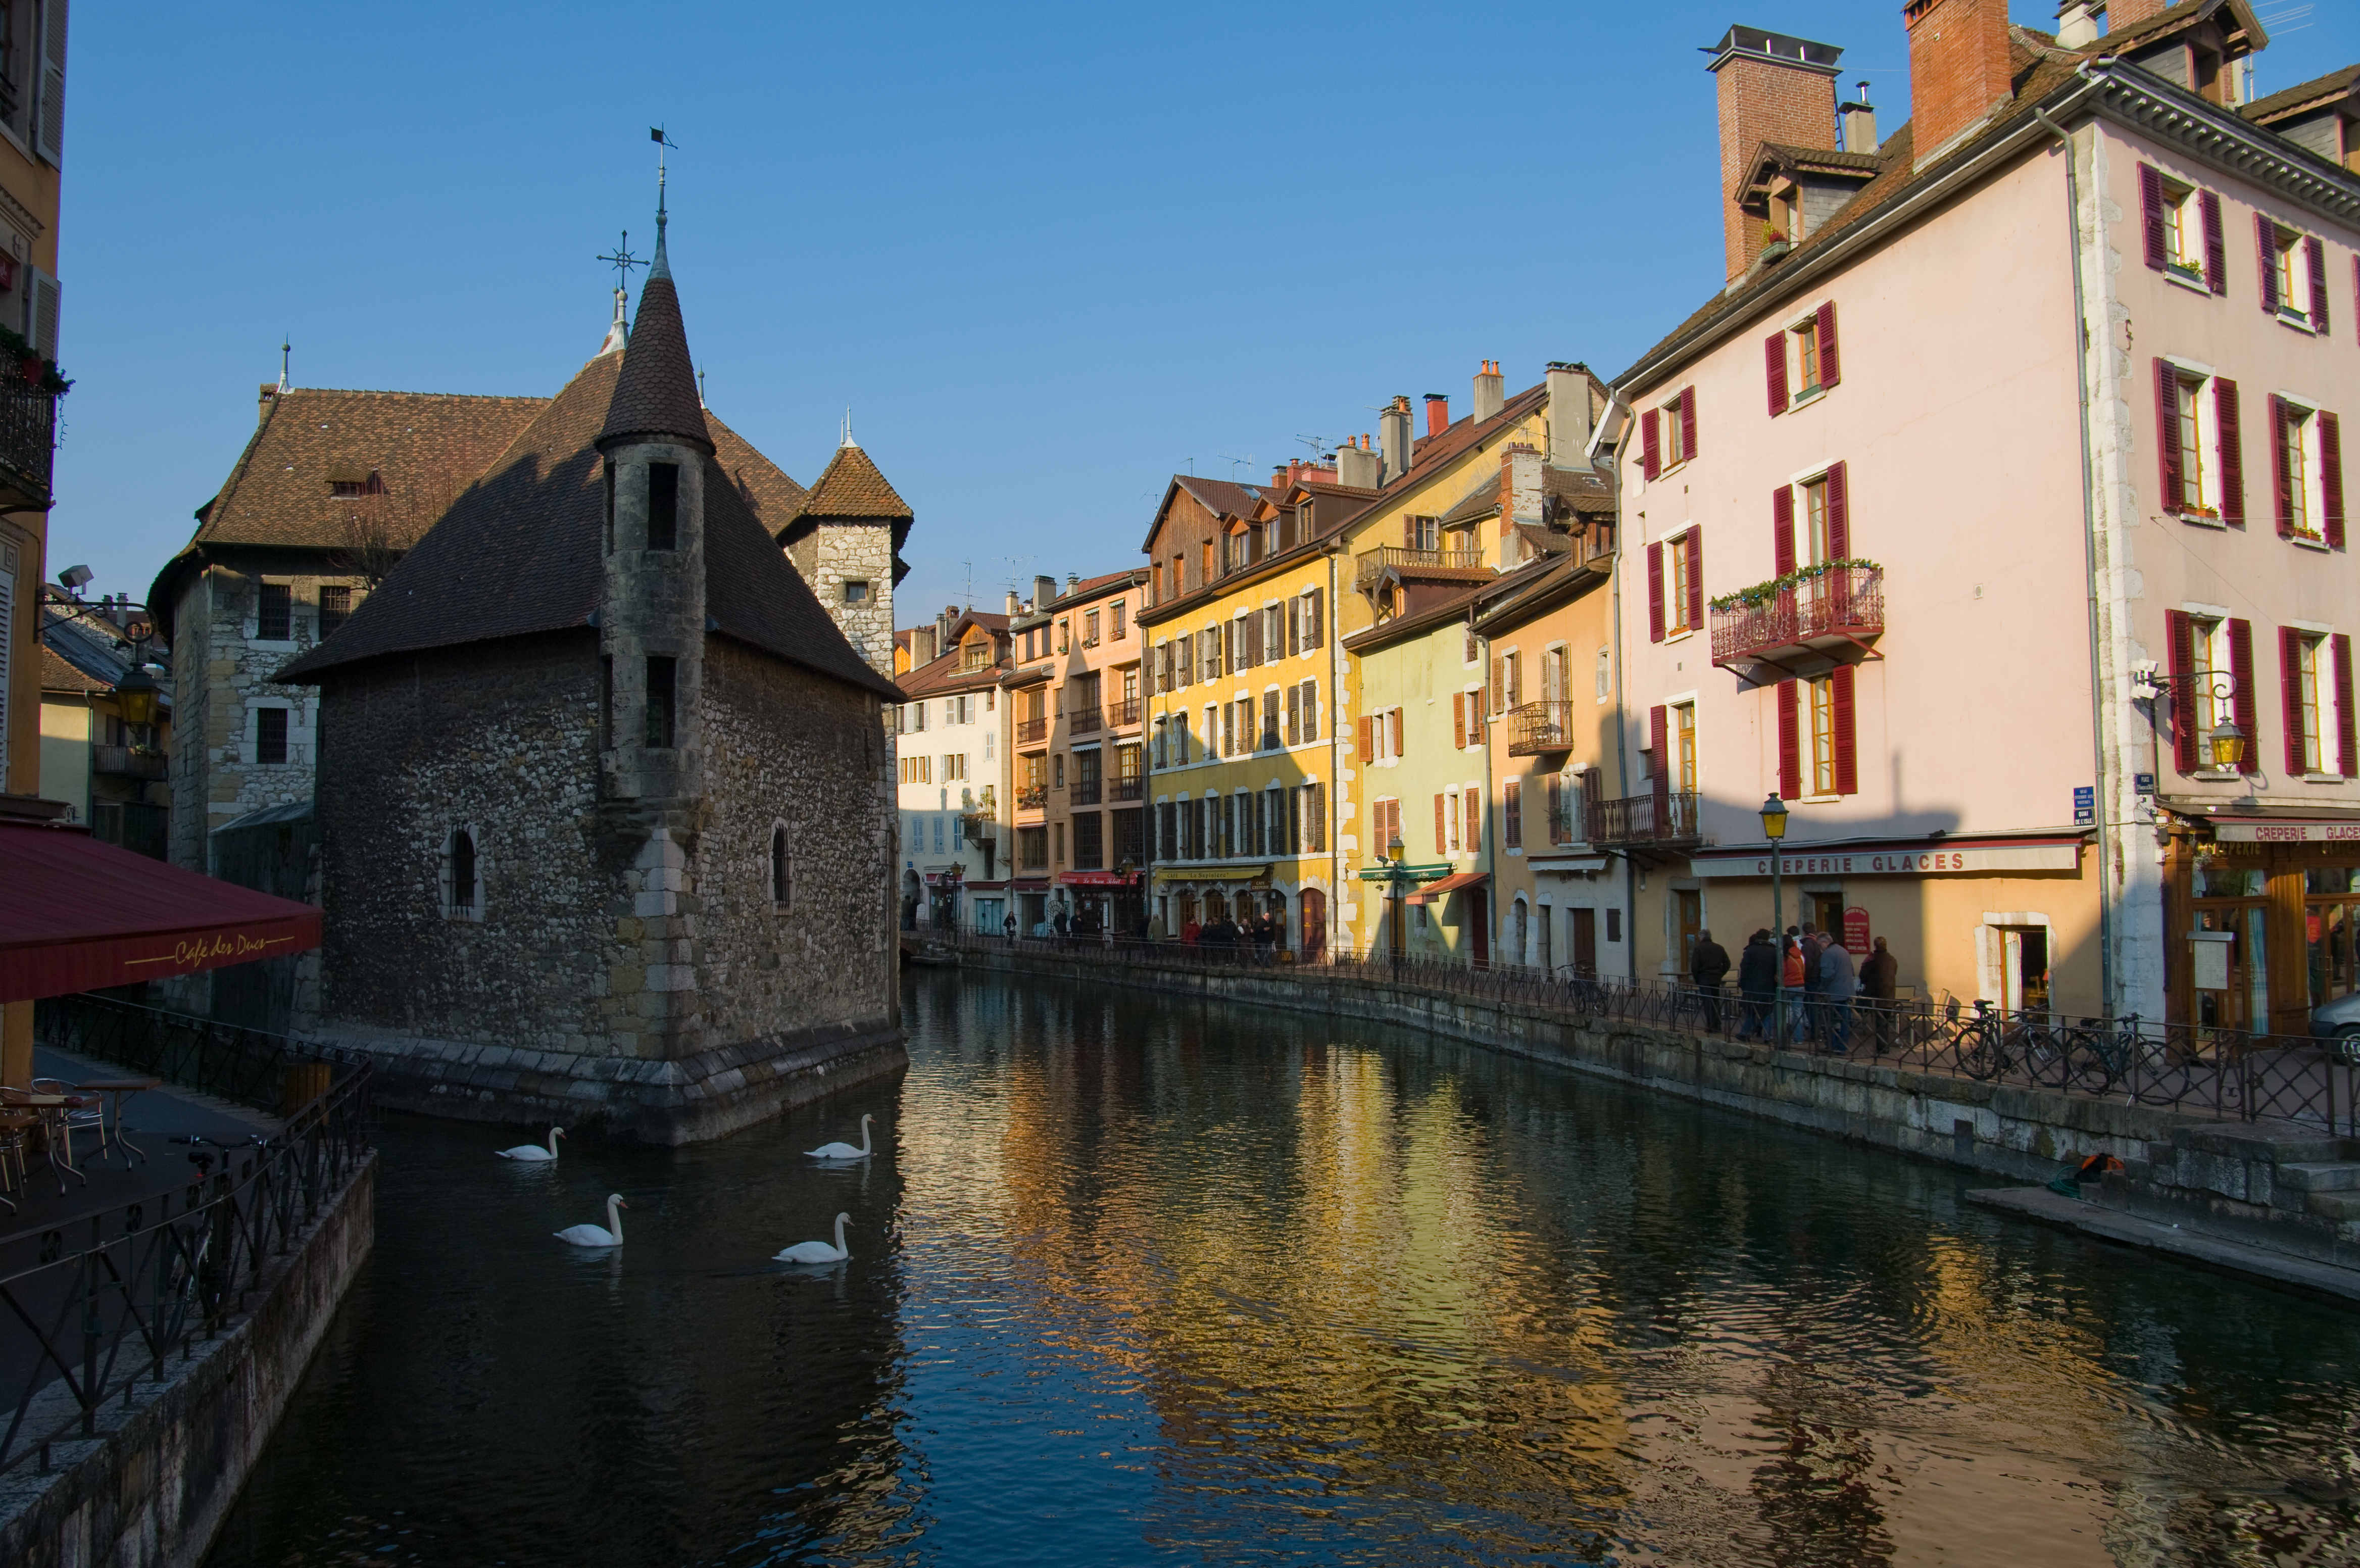 aNNECY